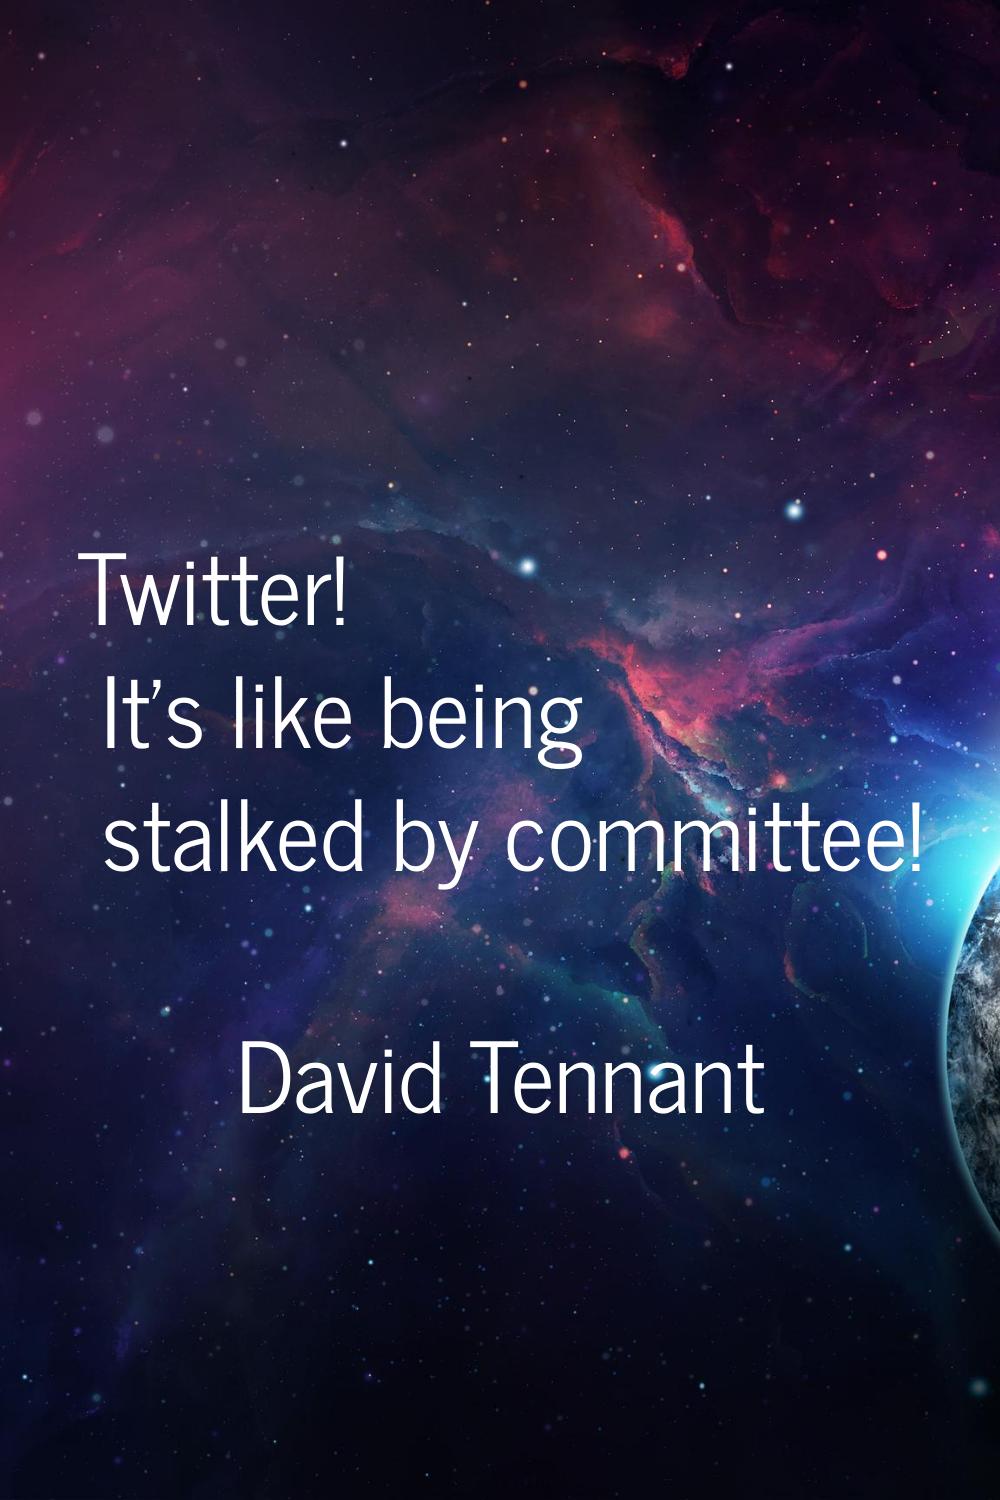 Twitter! It's like being stalked by committee!